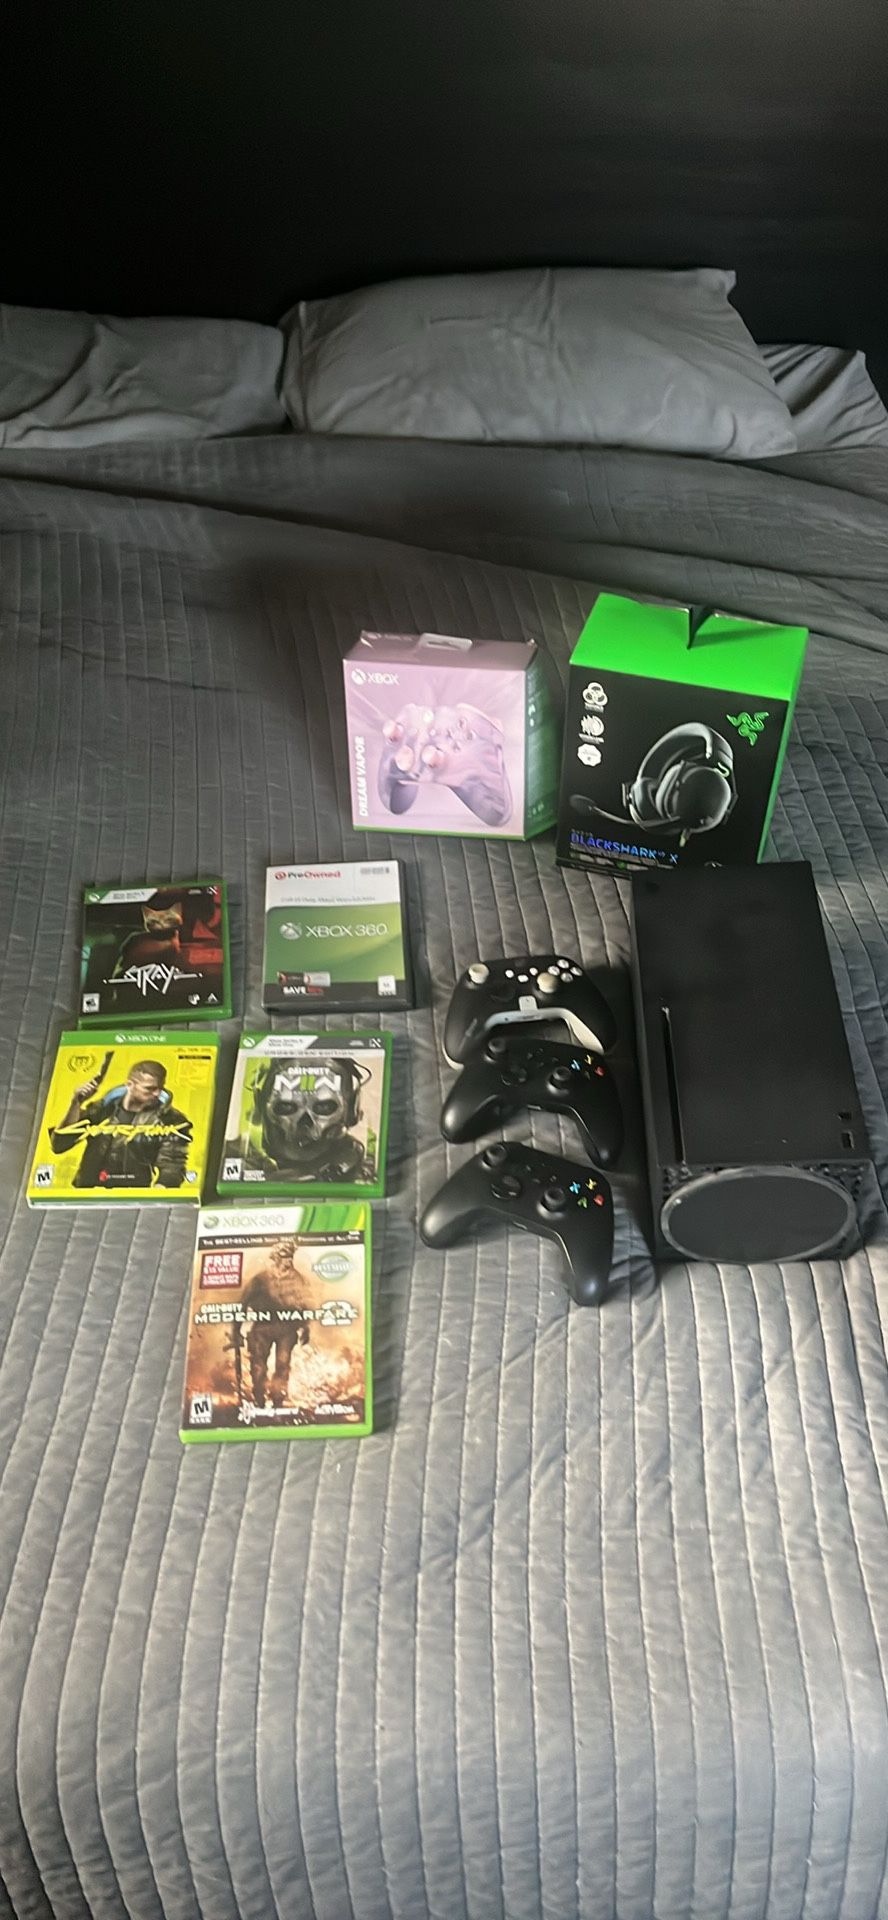 Xbox Series X With 4 Controllers (One Scuf Controller), 5 Games, And A Headset